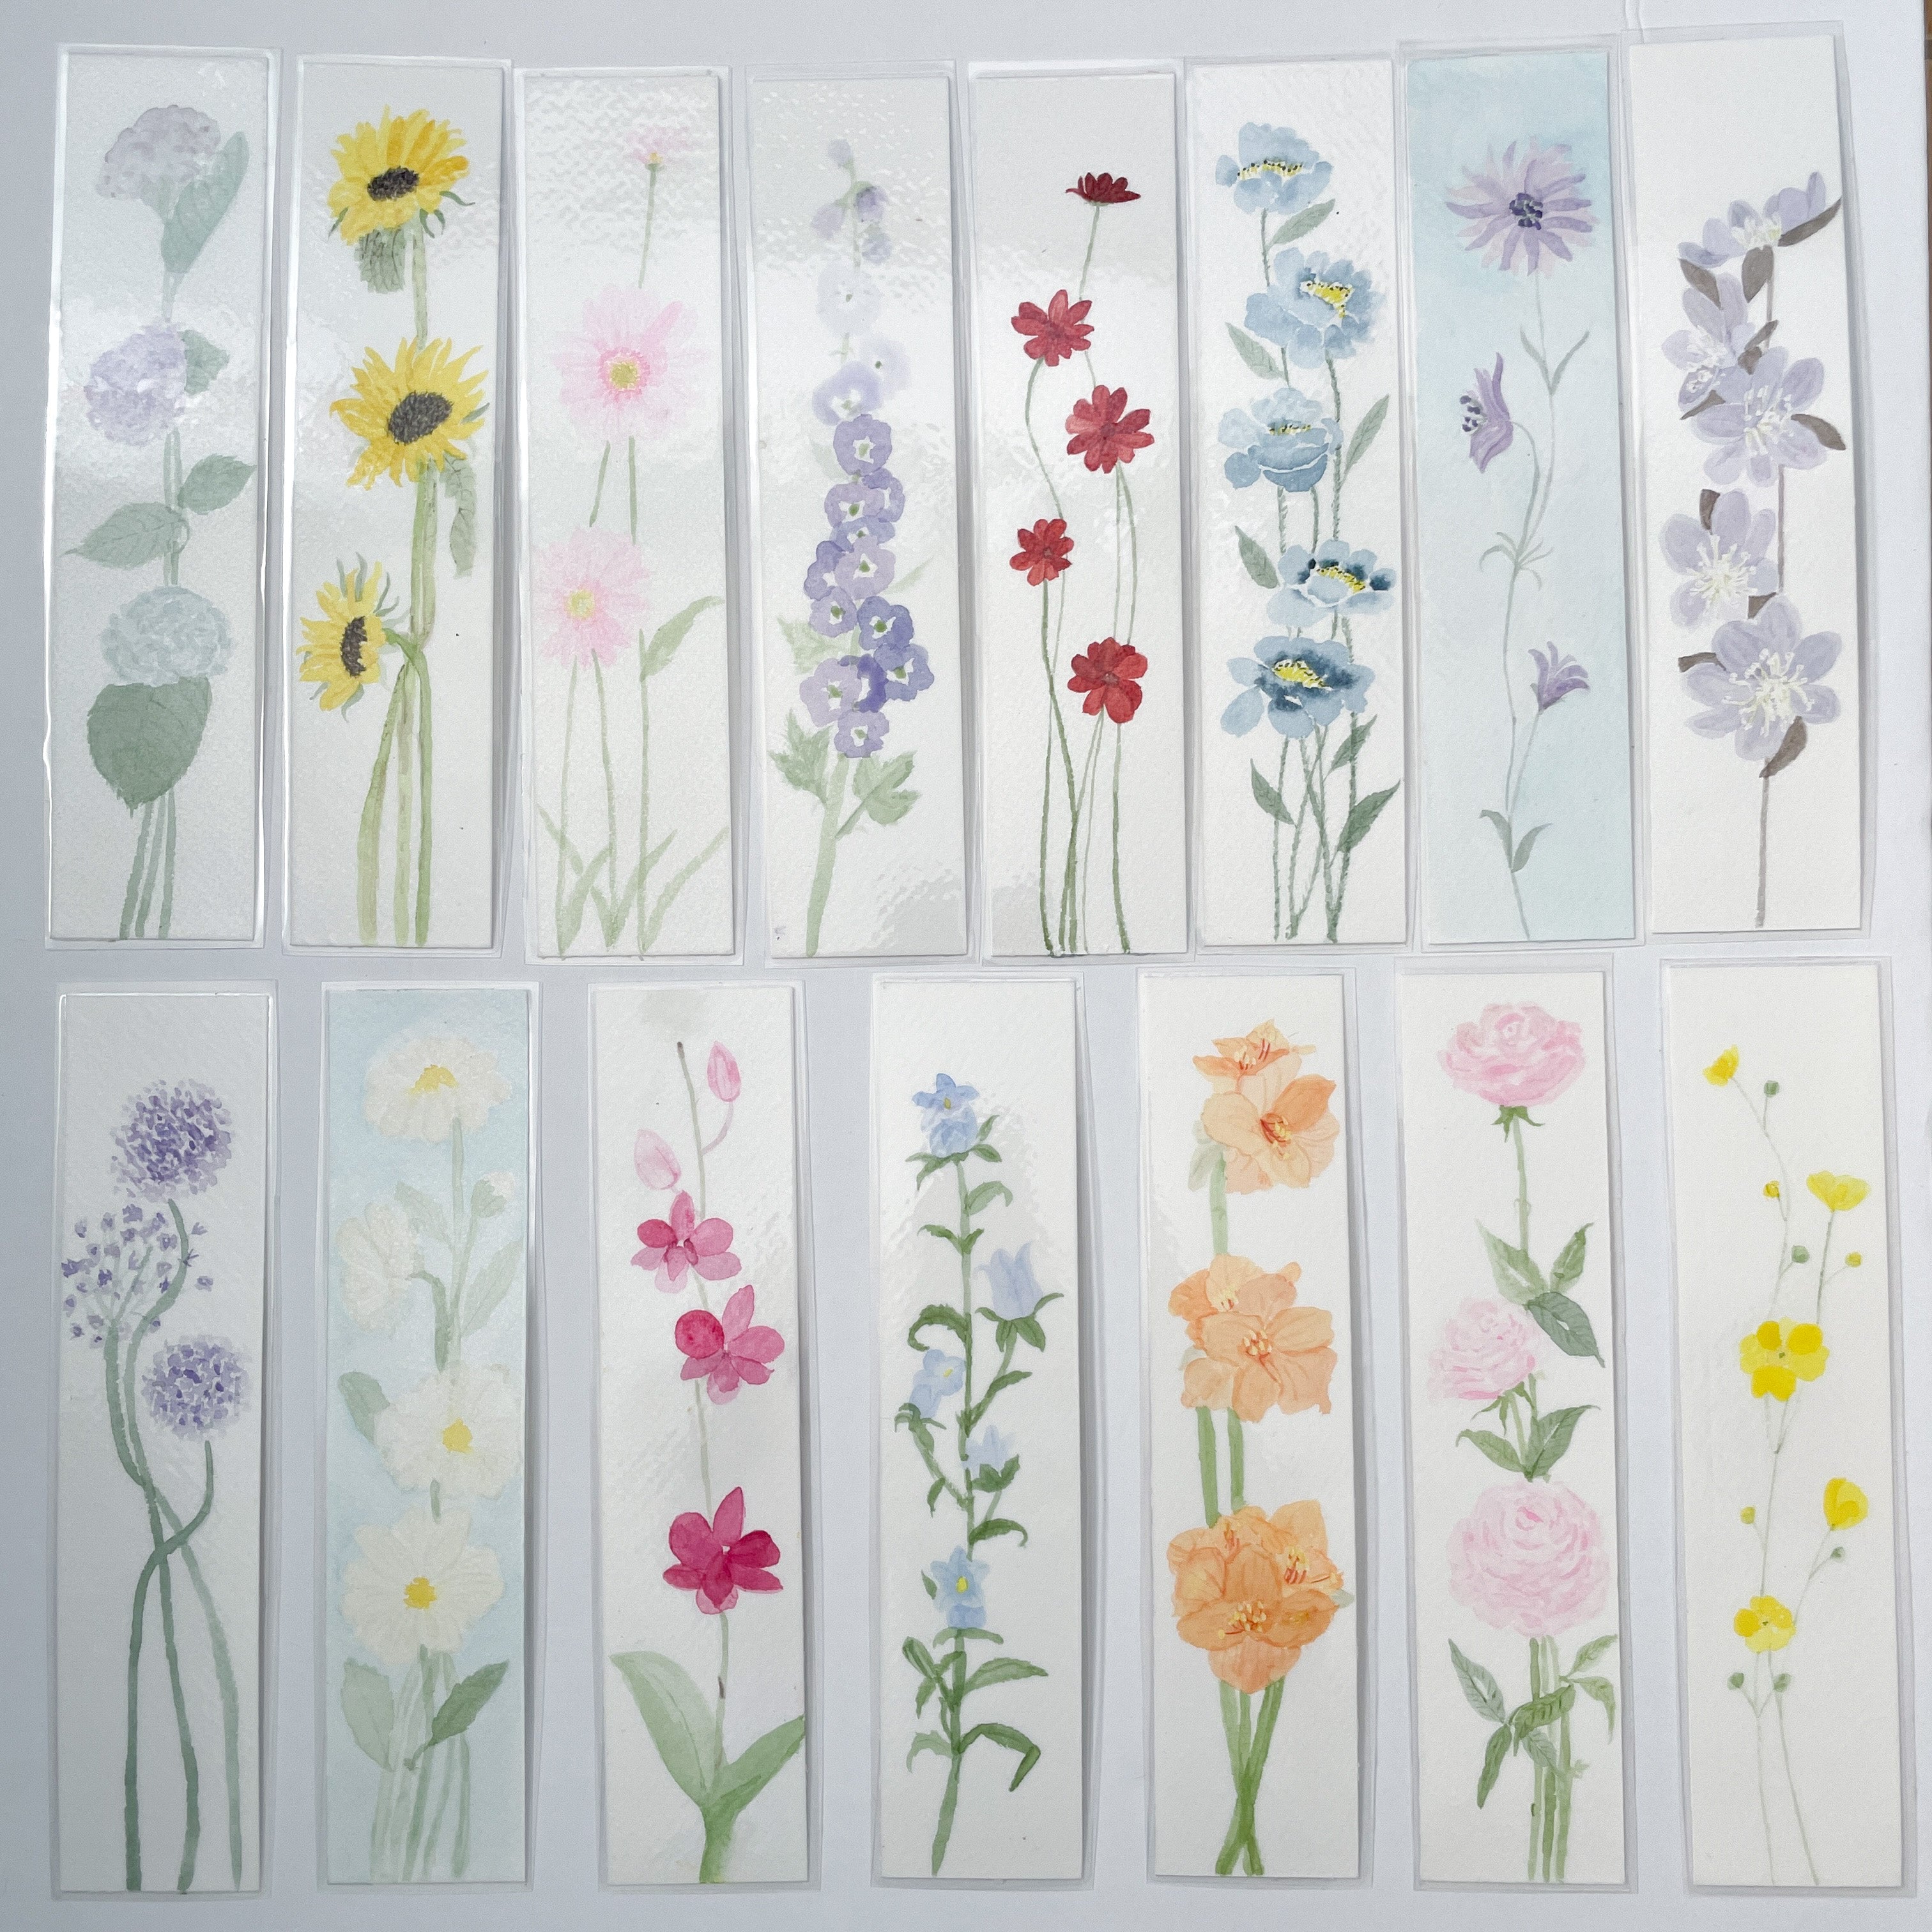 Watercolor Bookmark Gifts v2.0 – India Ink and Flower Doodles – Odyssey Art